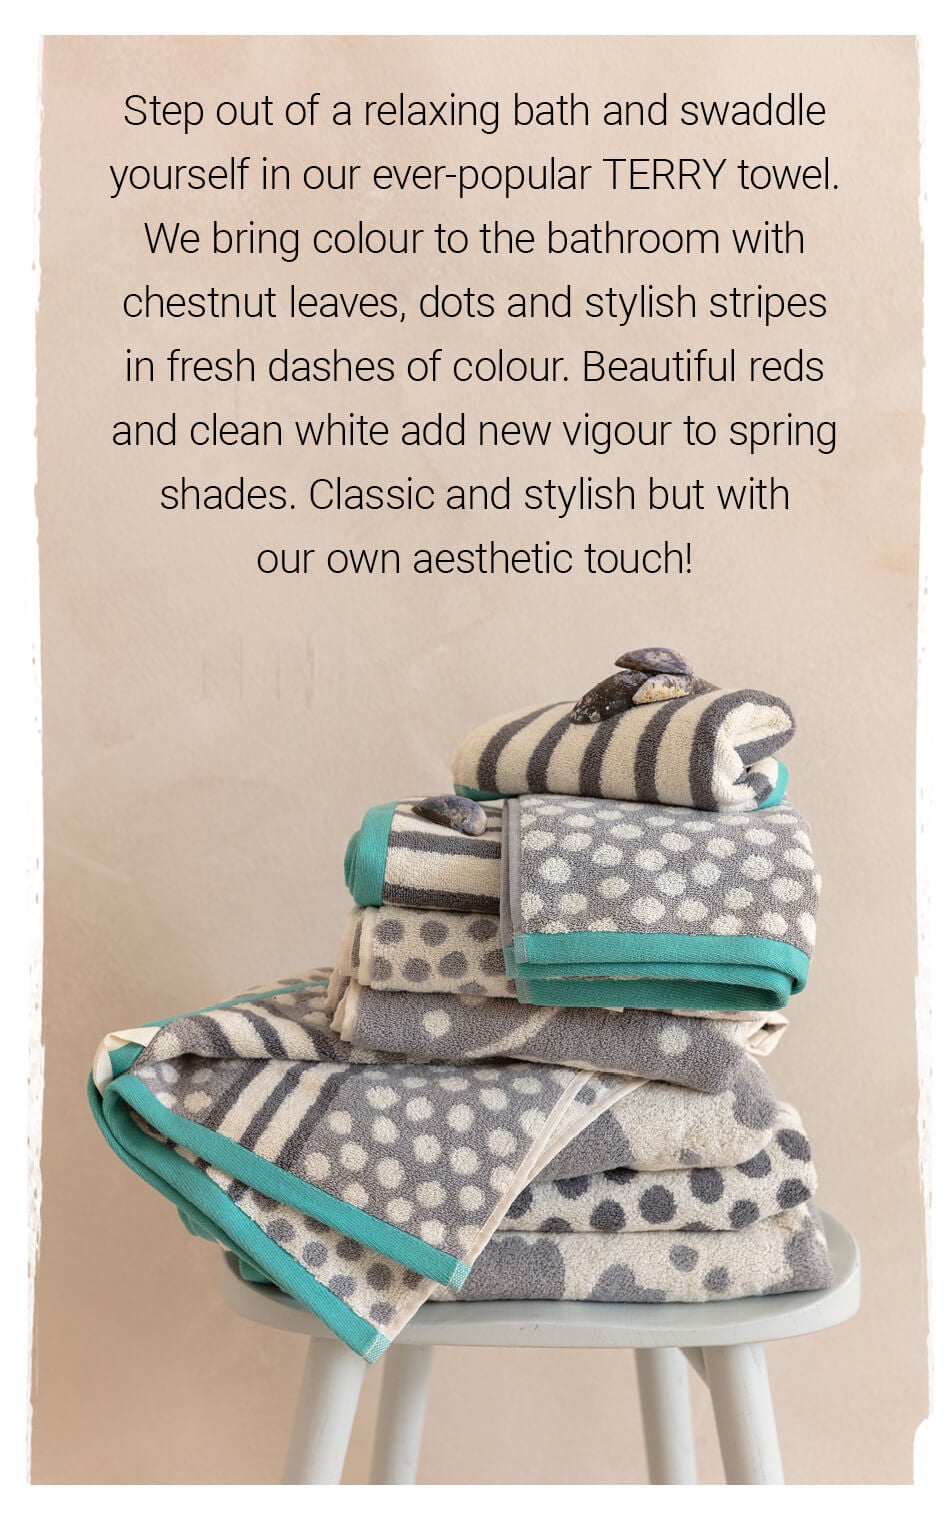 Step out of a relaxing bath and swaddle yourself in our ever-popular TERRY towel. 